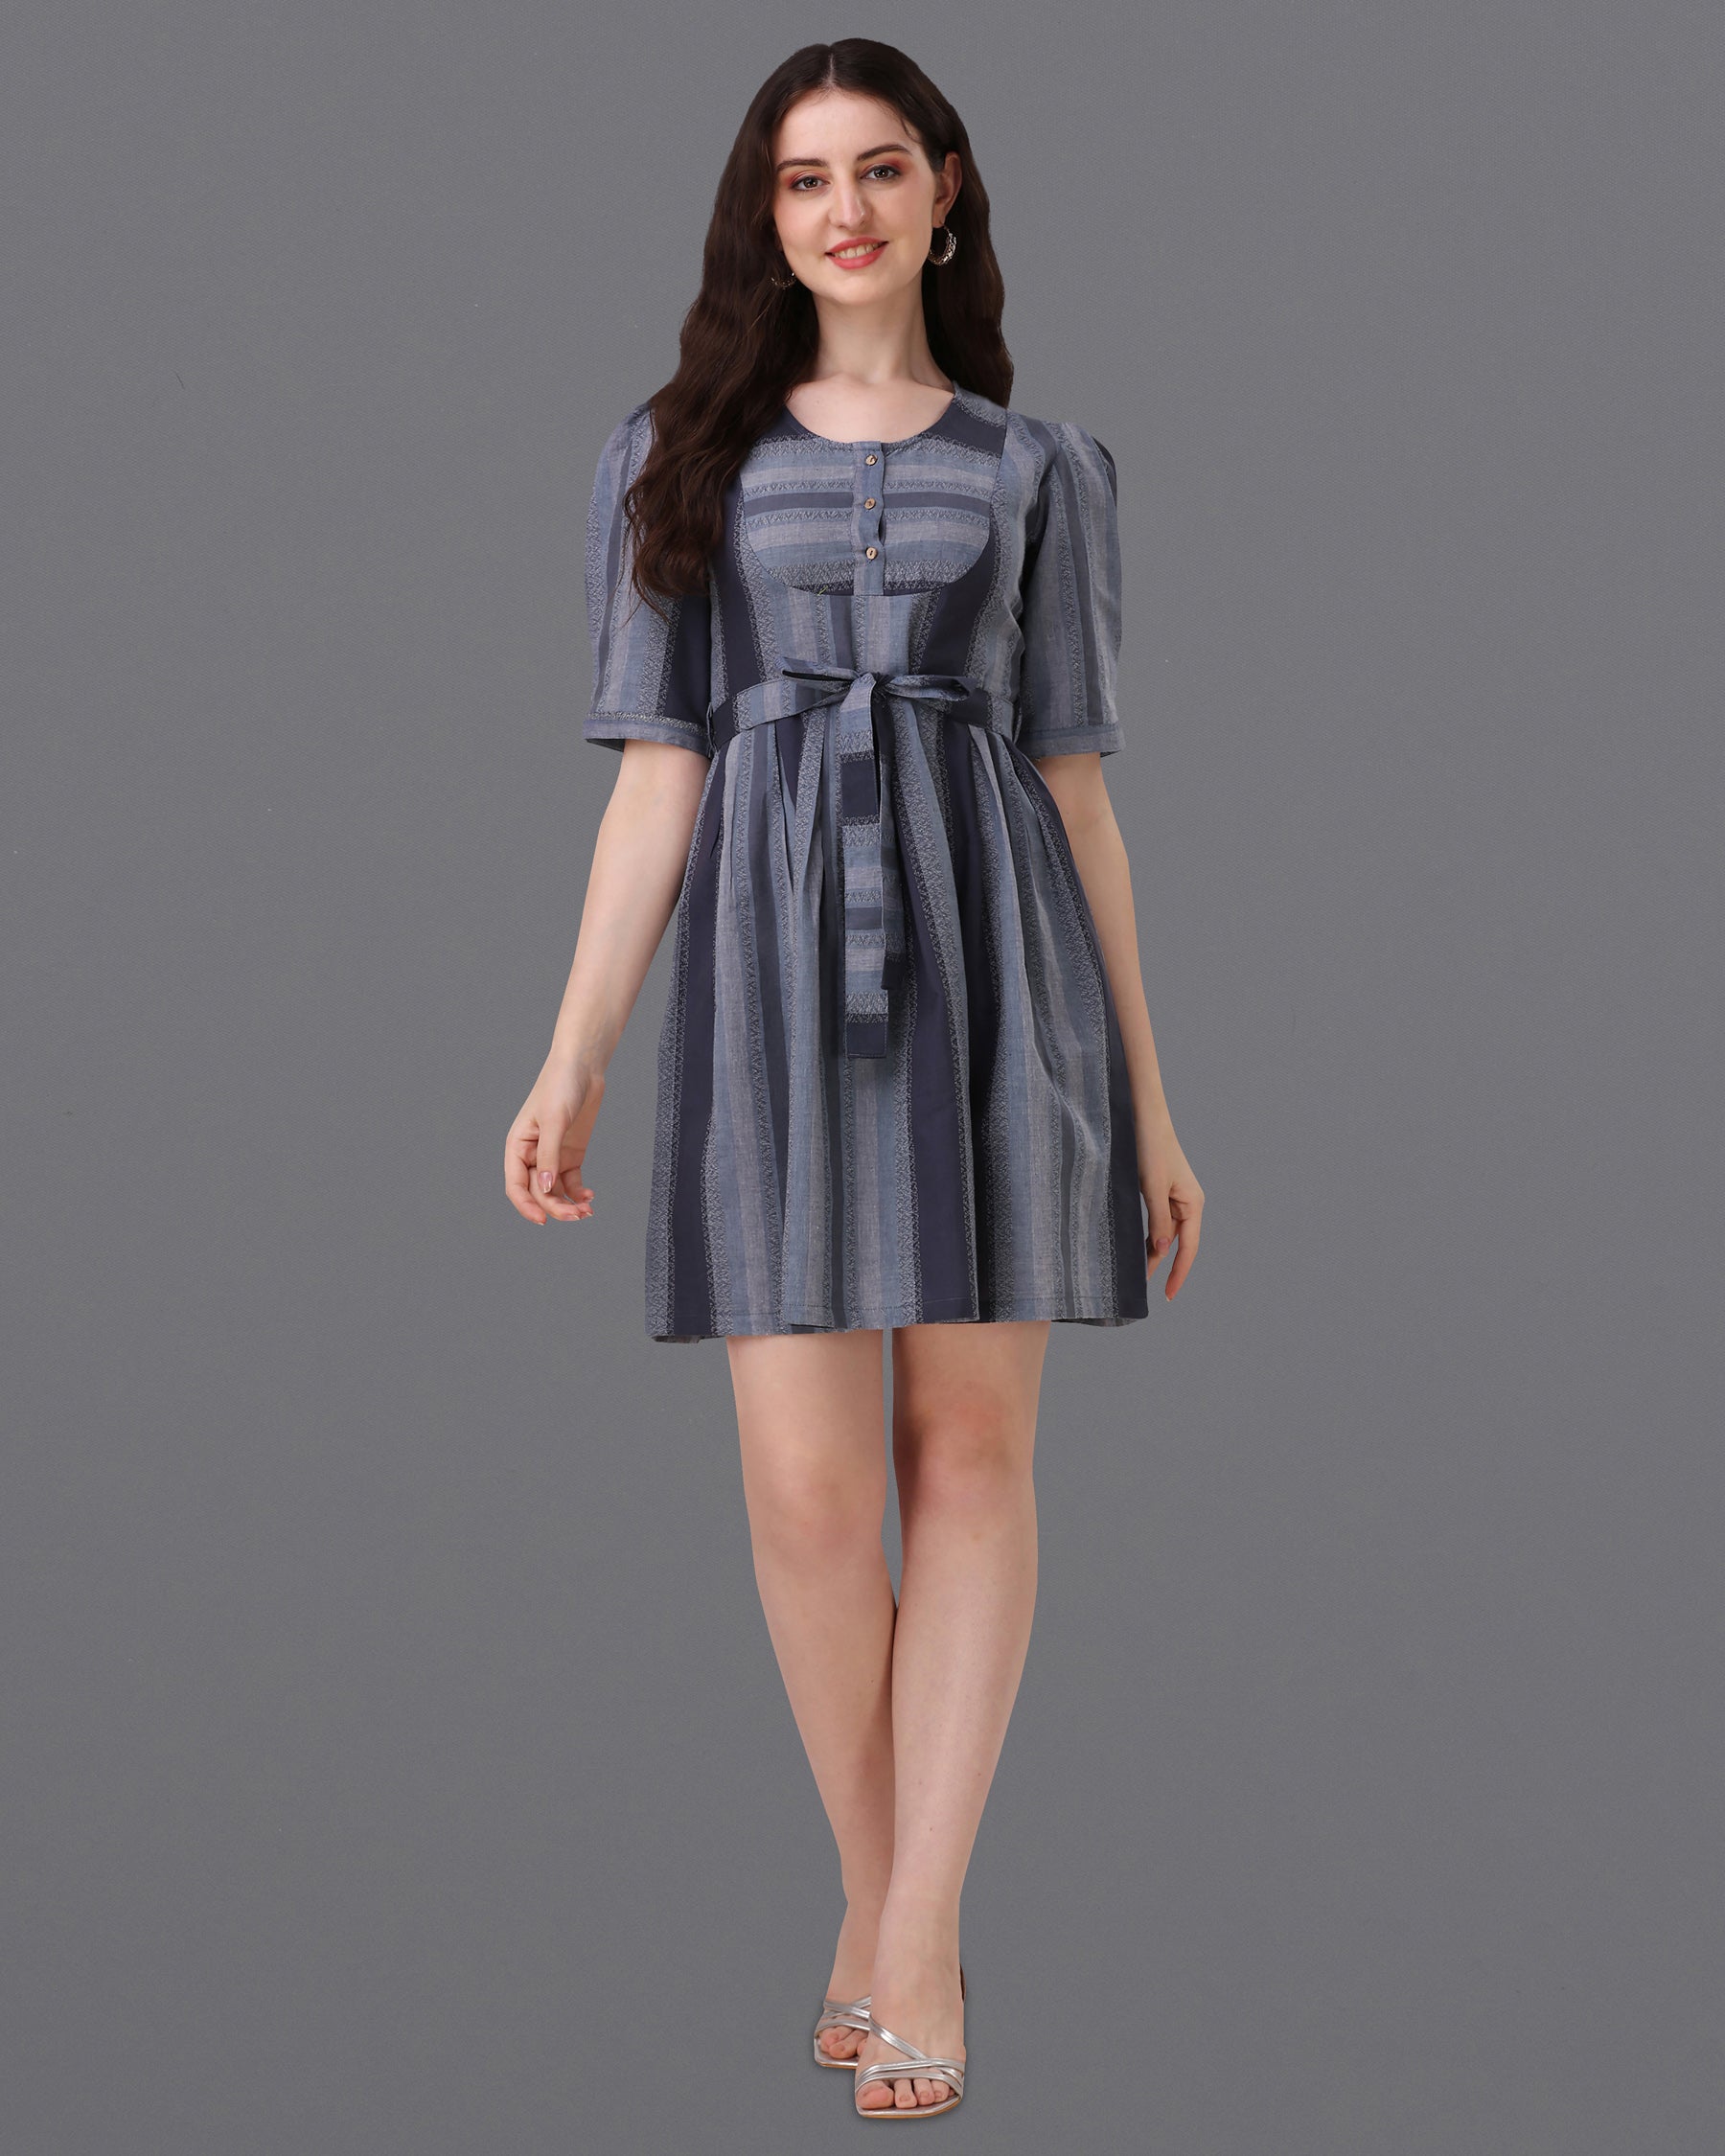 Iridium Blue with Mobster Gray Super Soft Premium Cotton Thigh Length Dress WD036-32, WD036-34, WD036-36, WD036-38, WD036-40, WD036-42